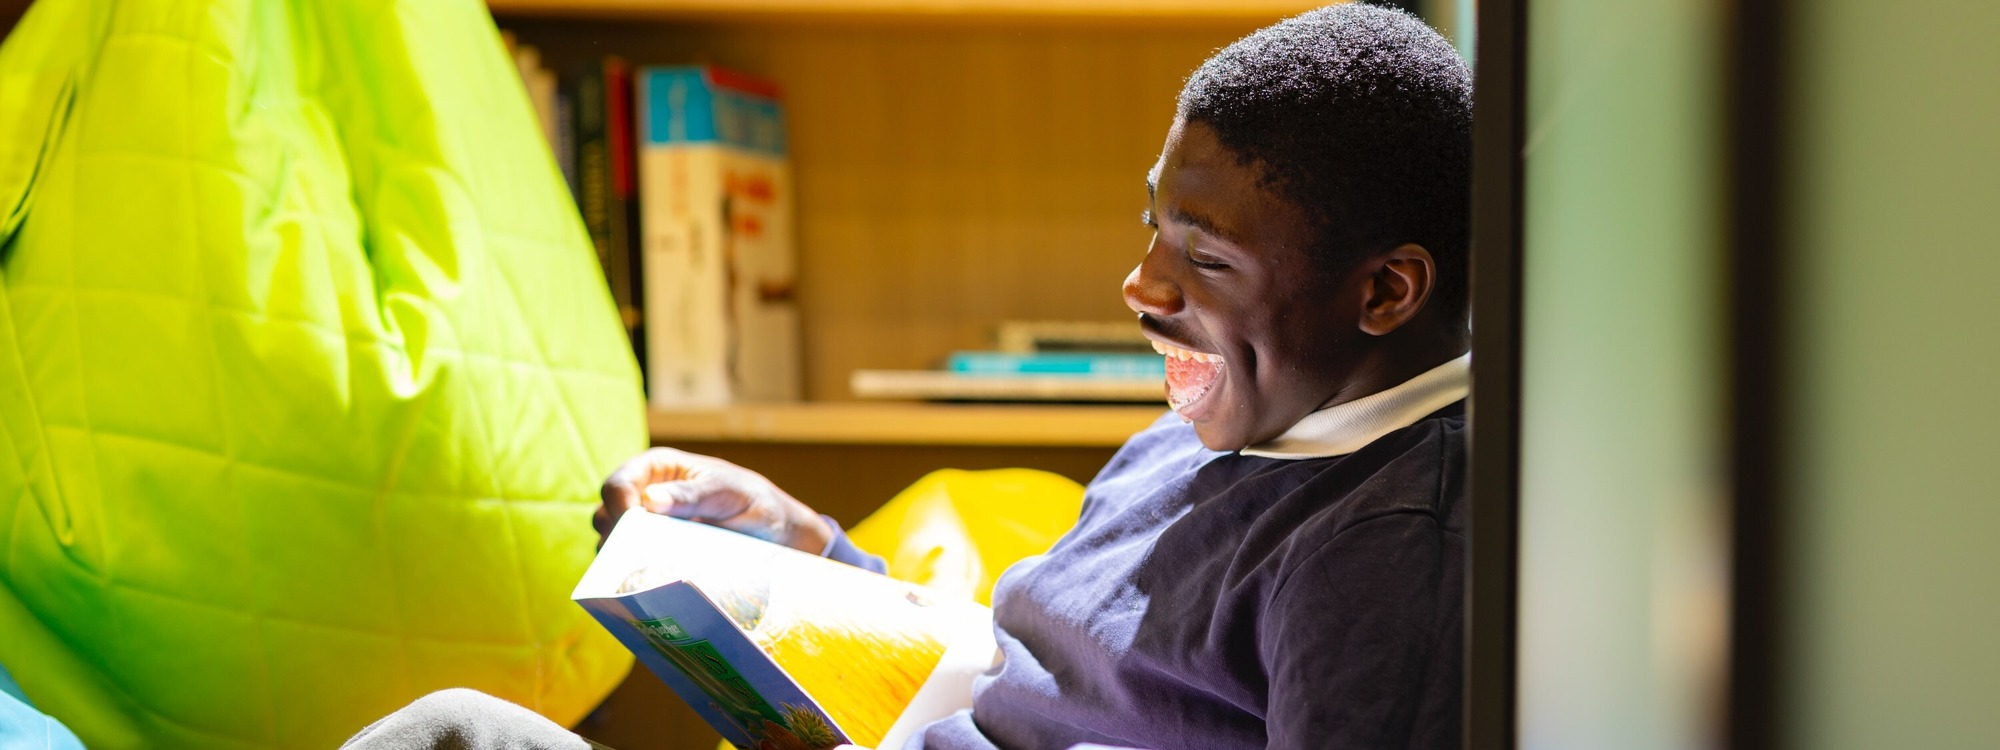 Student sitting reading a book and laughing